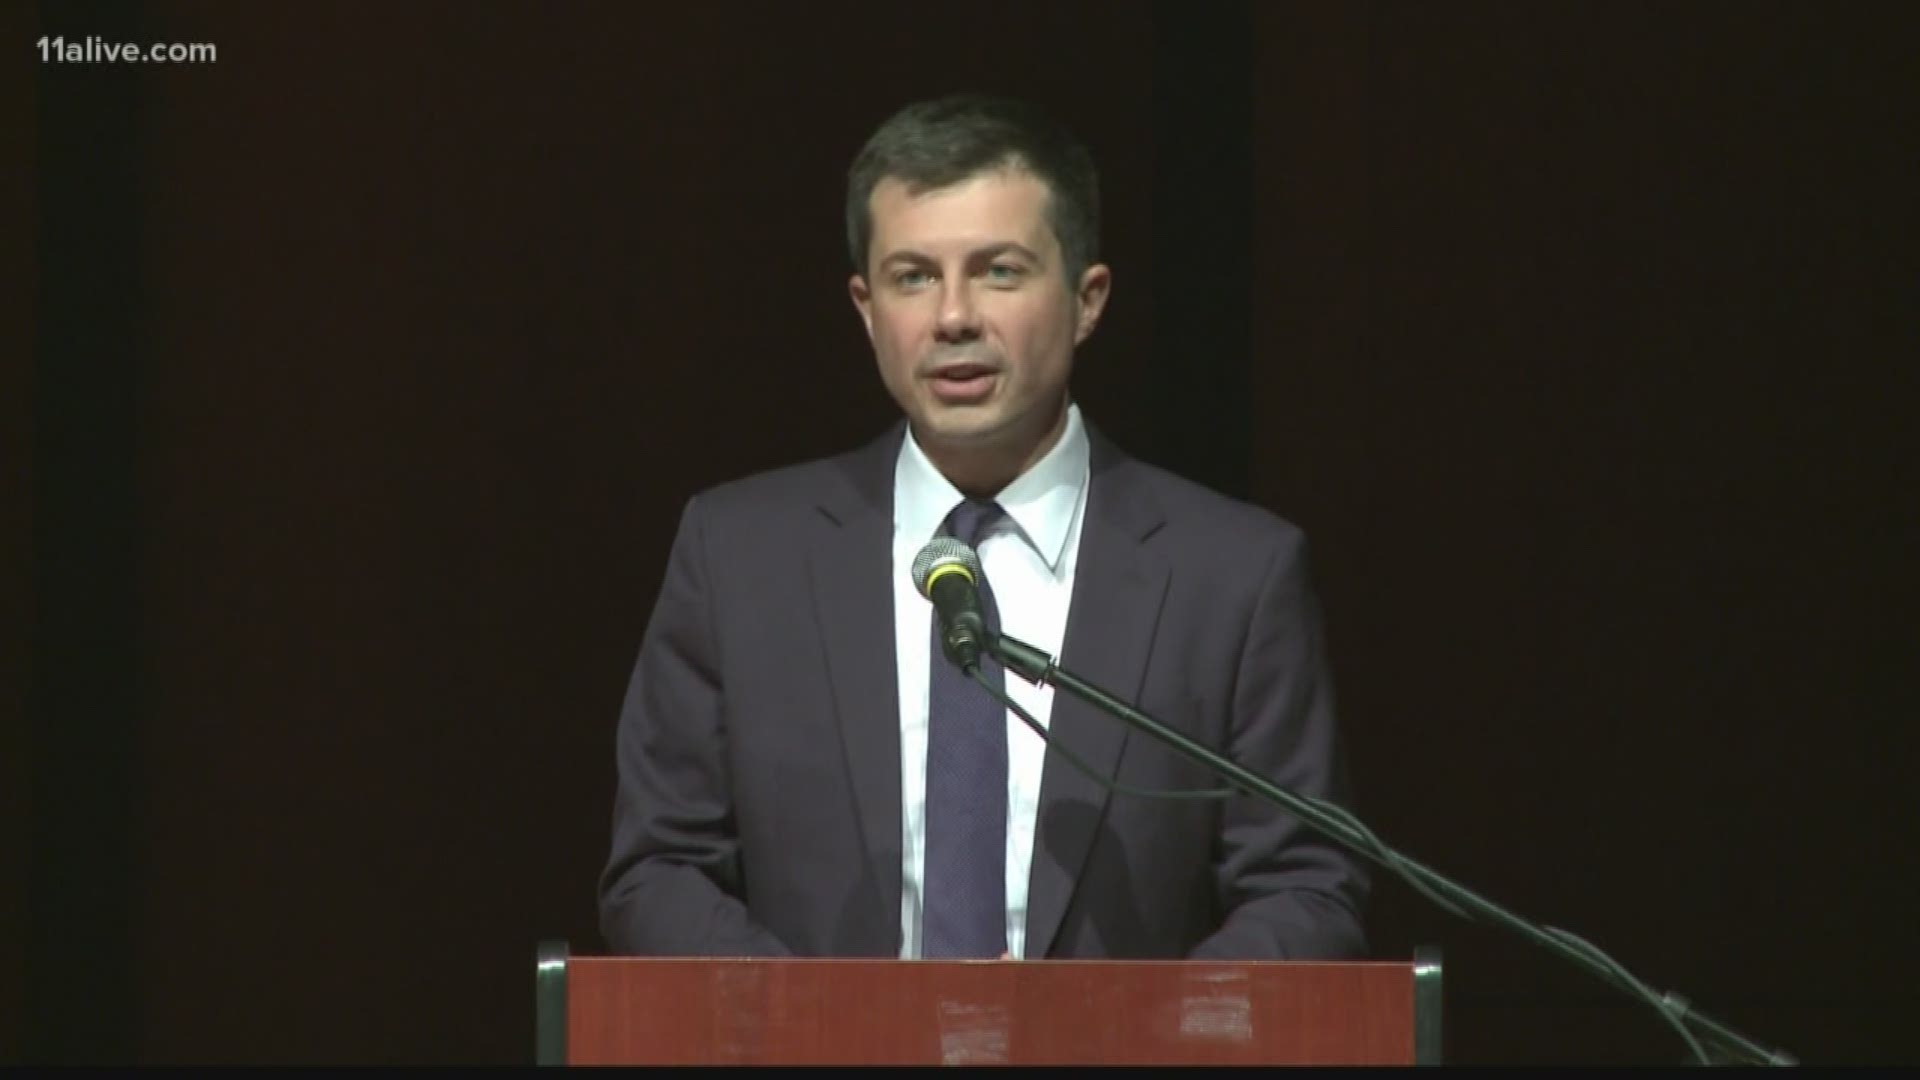 Pete Buttigieg, climbing in the polls of Democrats running for president, is working to earn African-American support.